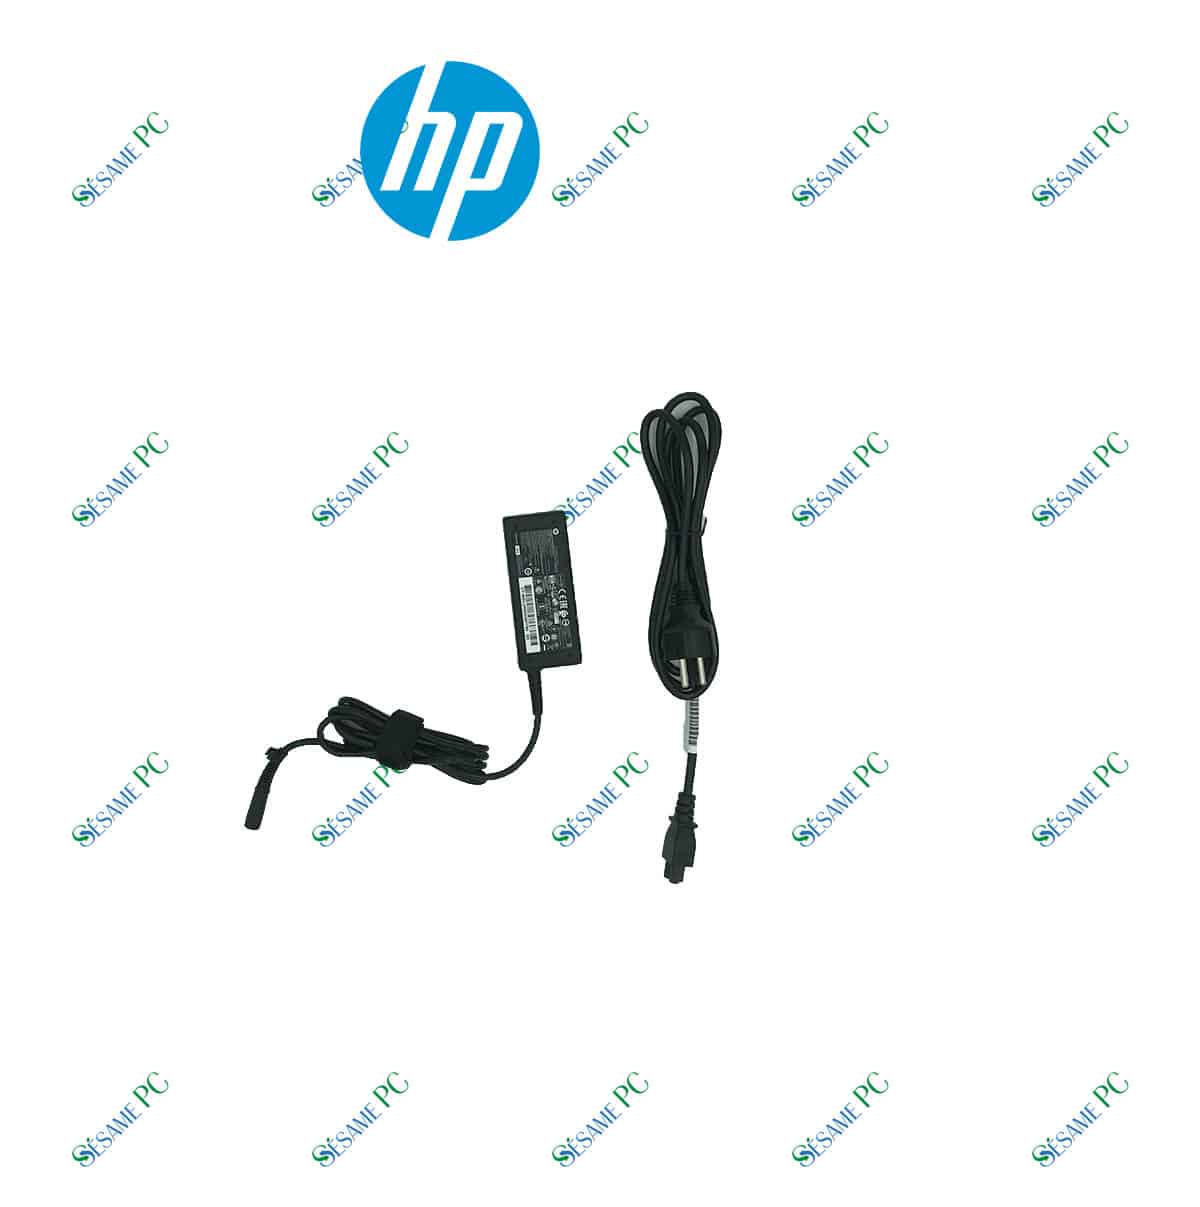 HP Chargeur 65 W